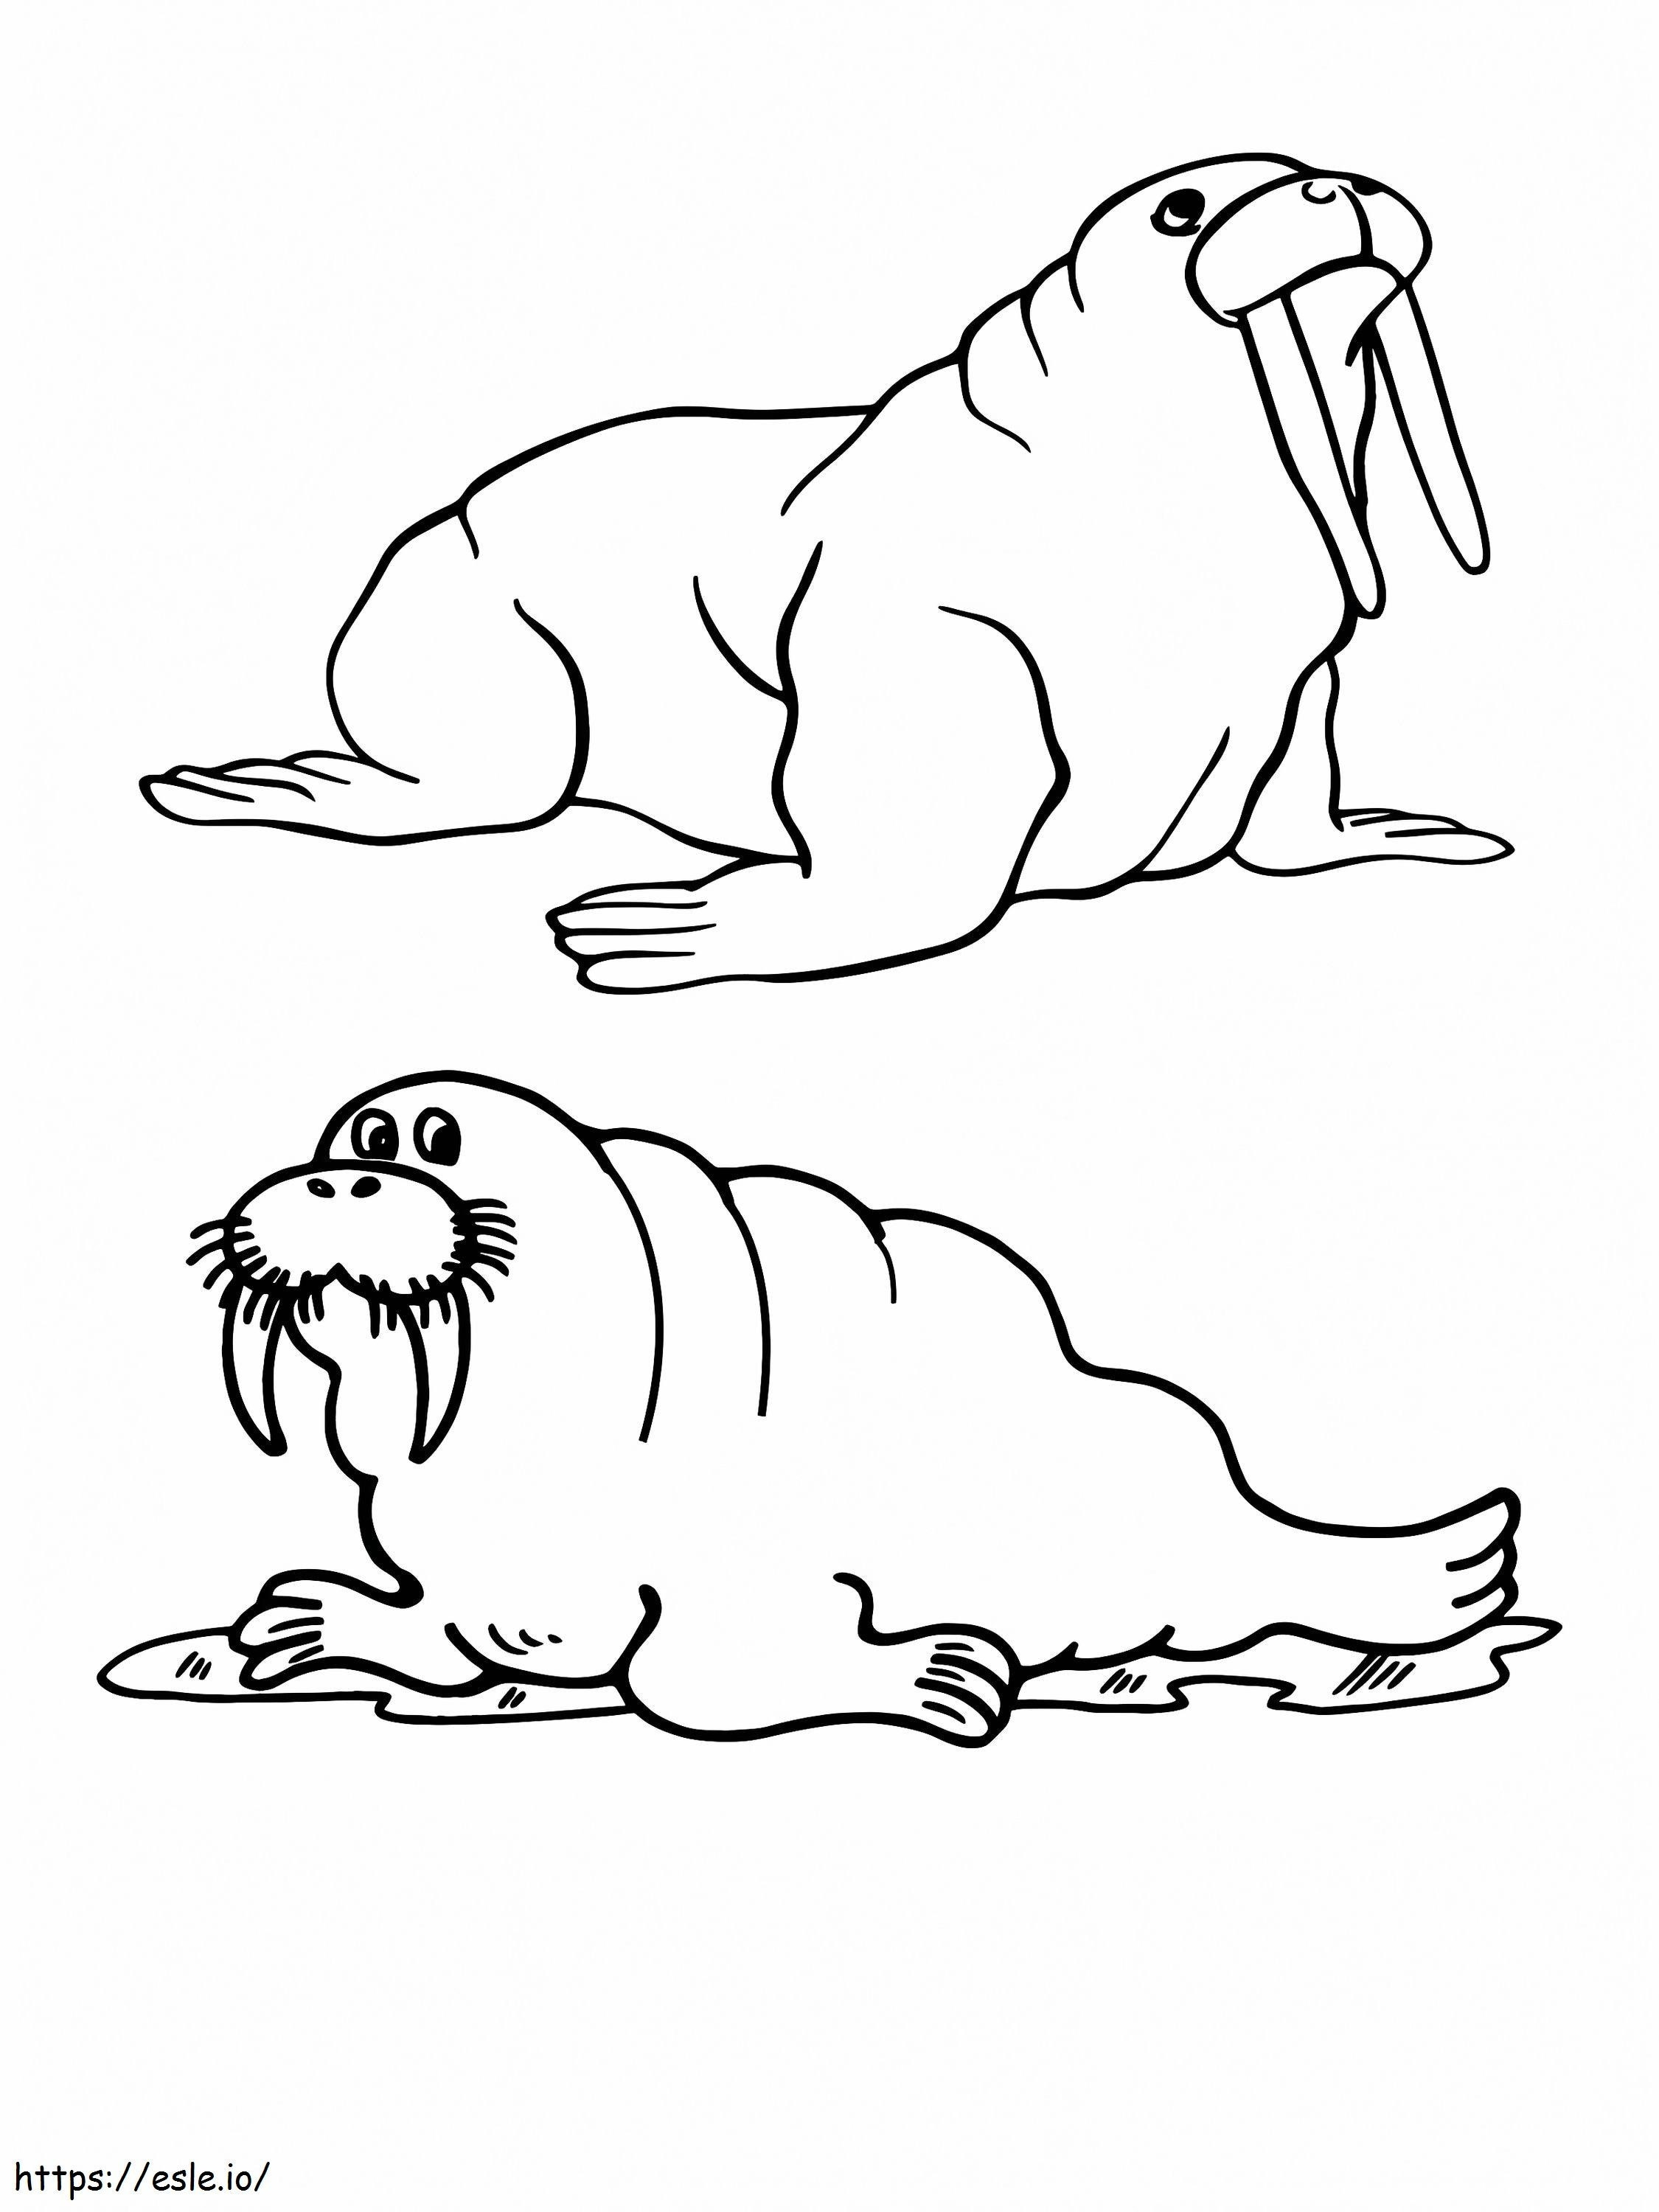 Two Walruses Arctic Animals coloring page